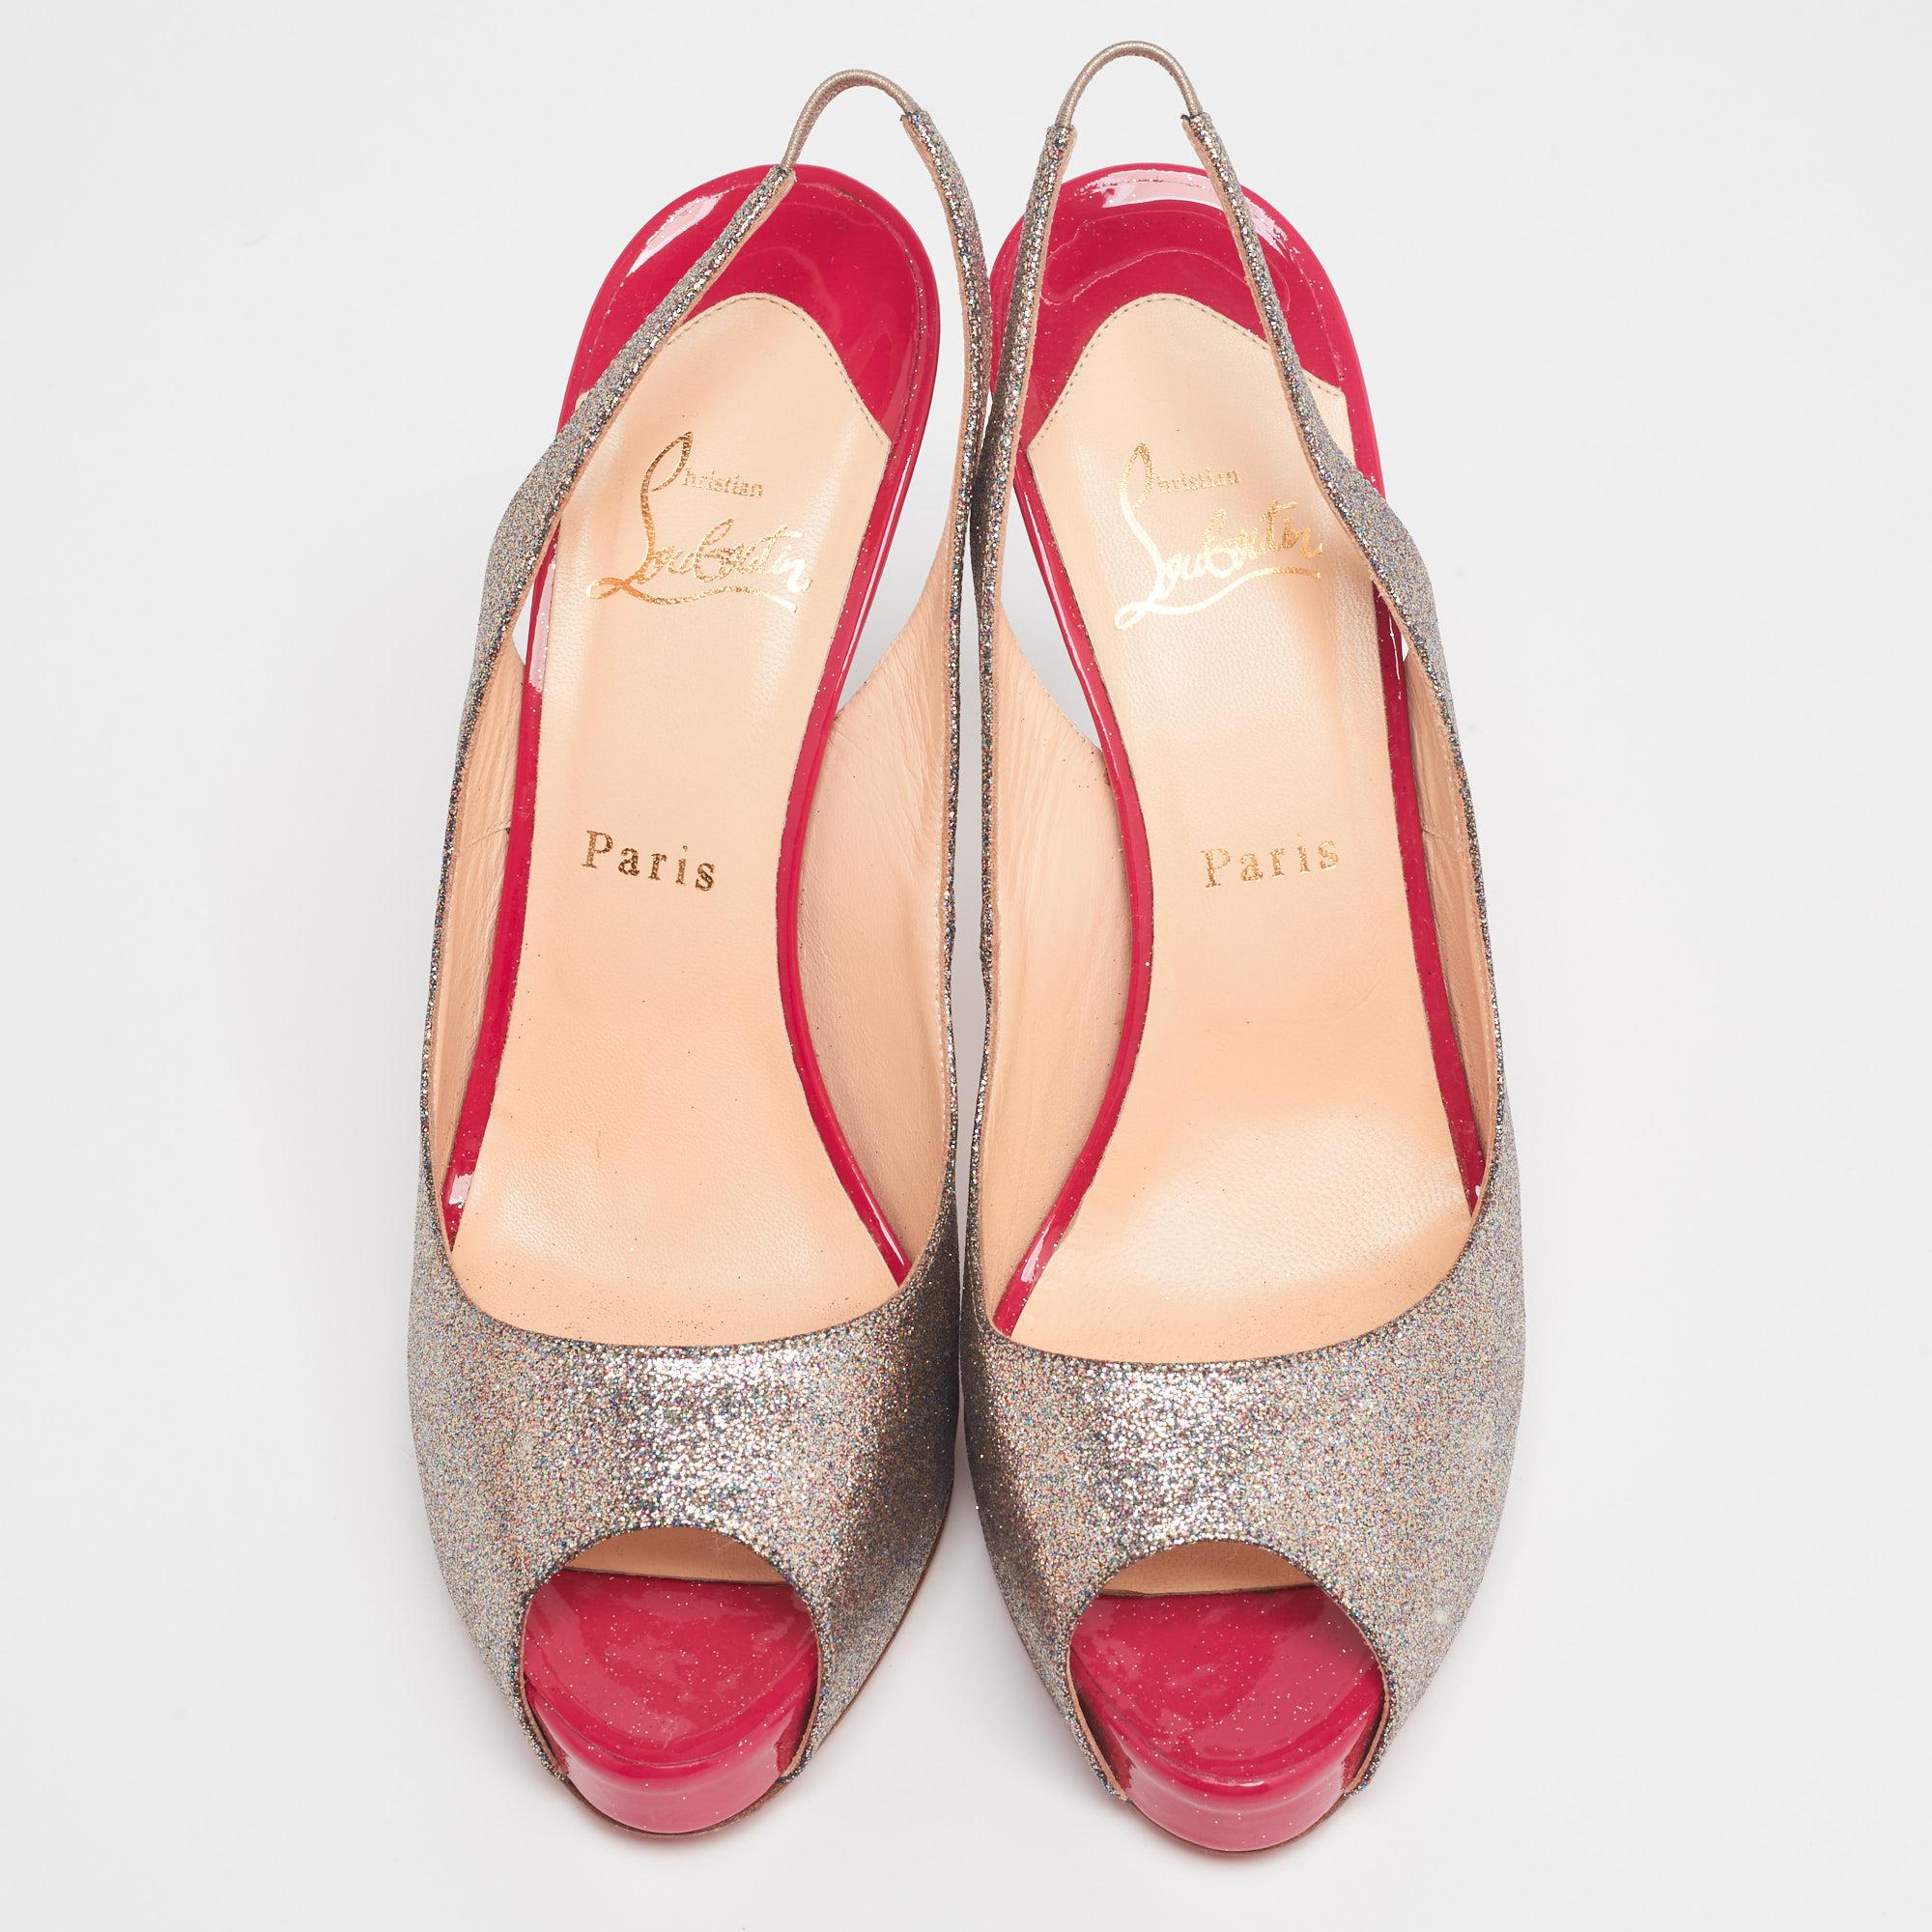 The architectural silhouette and sleek heels of this pair of Christian Louboutin pumps exemplify the brand's mastery in the art of stiletto making. Finely created from glitter, it has been detailed with slingback closure and peep toe. The signature